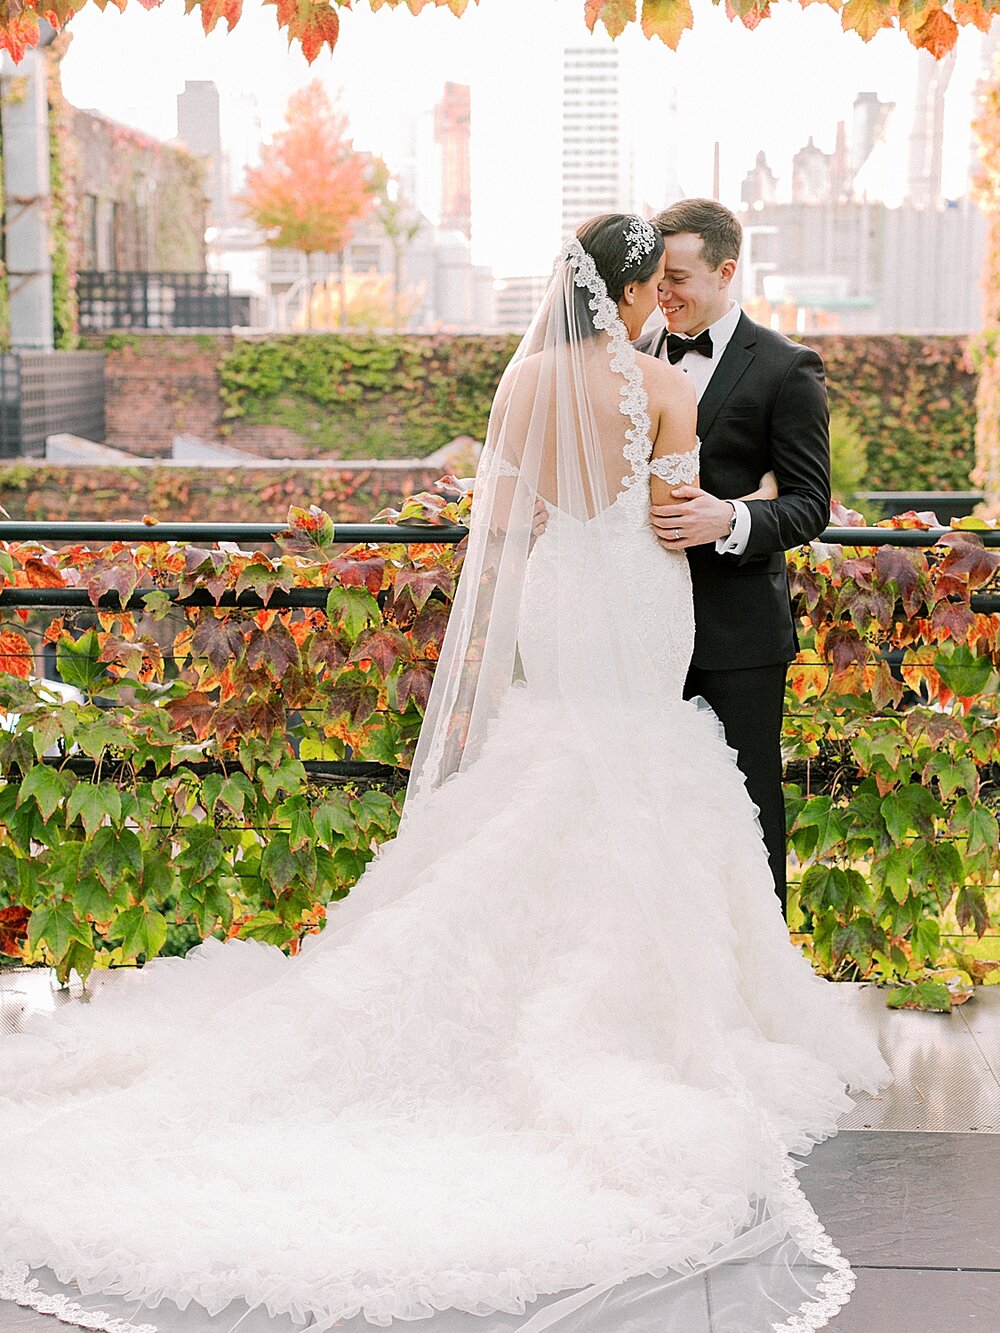 bride and groom pose during fall wedding at The Foundry | Tri-State area wedding venues photographed by Asher Gardner Photography